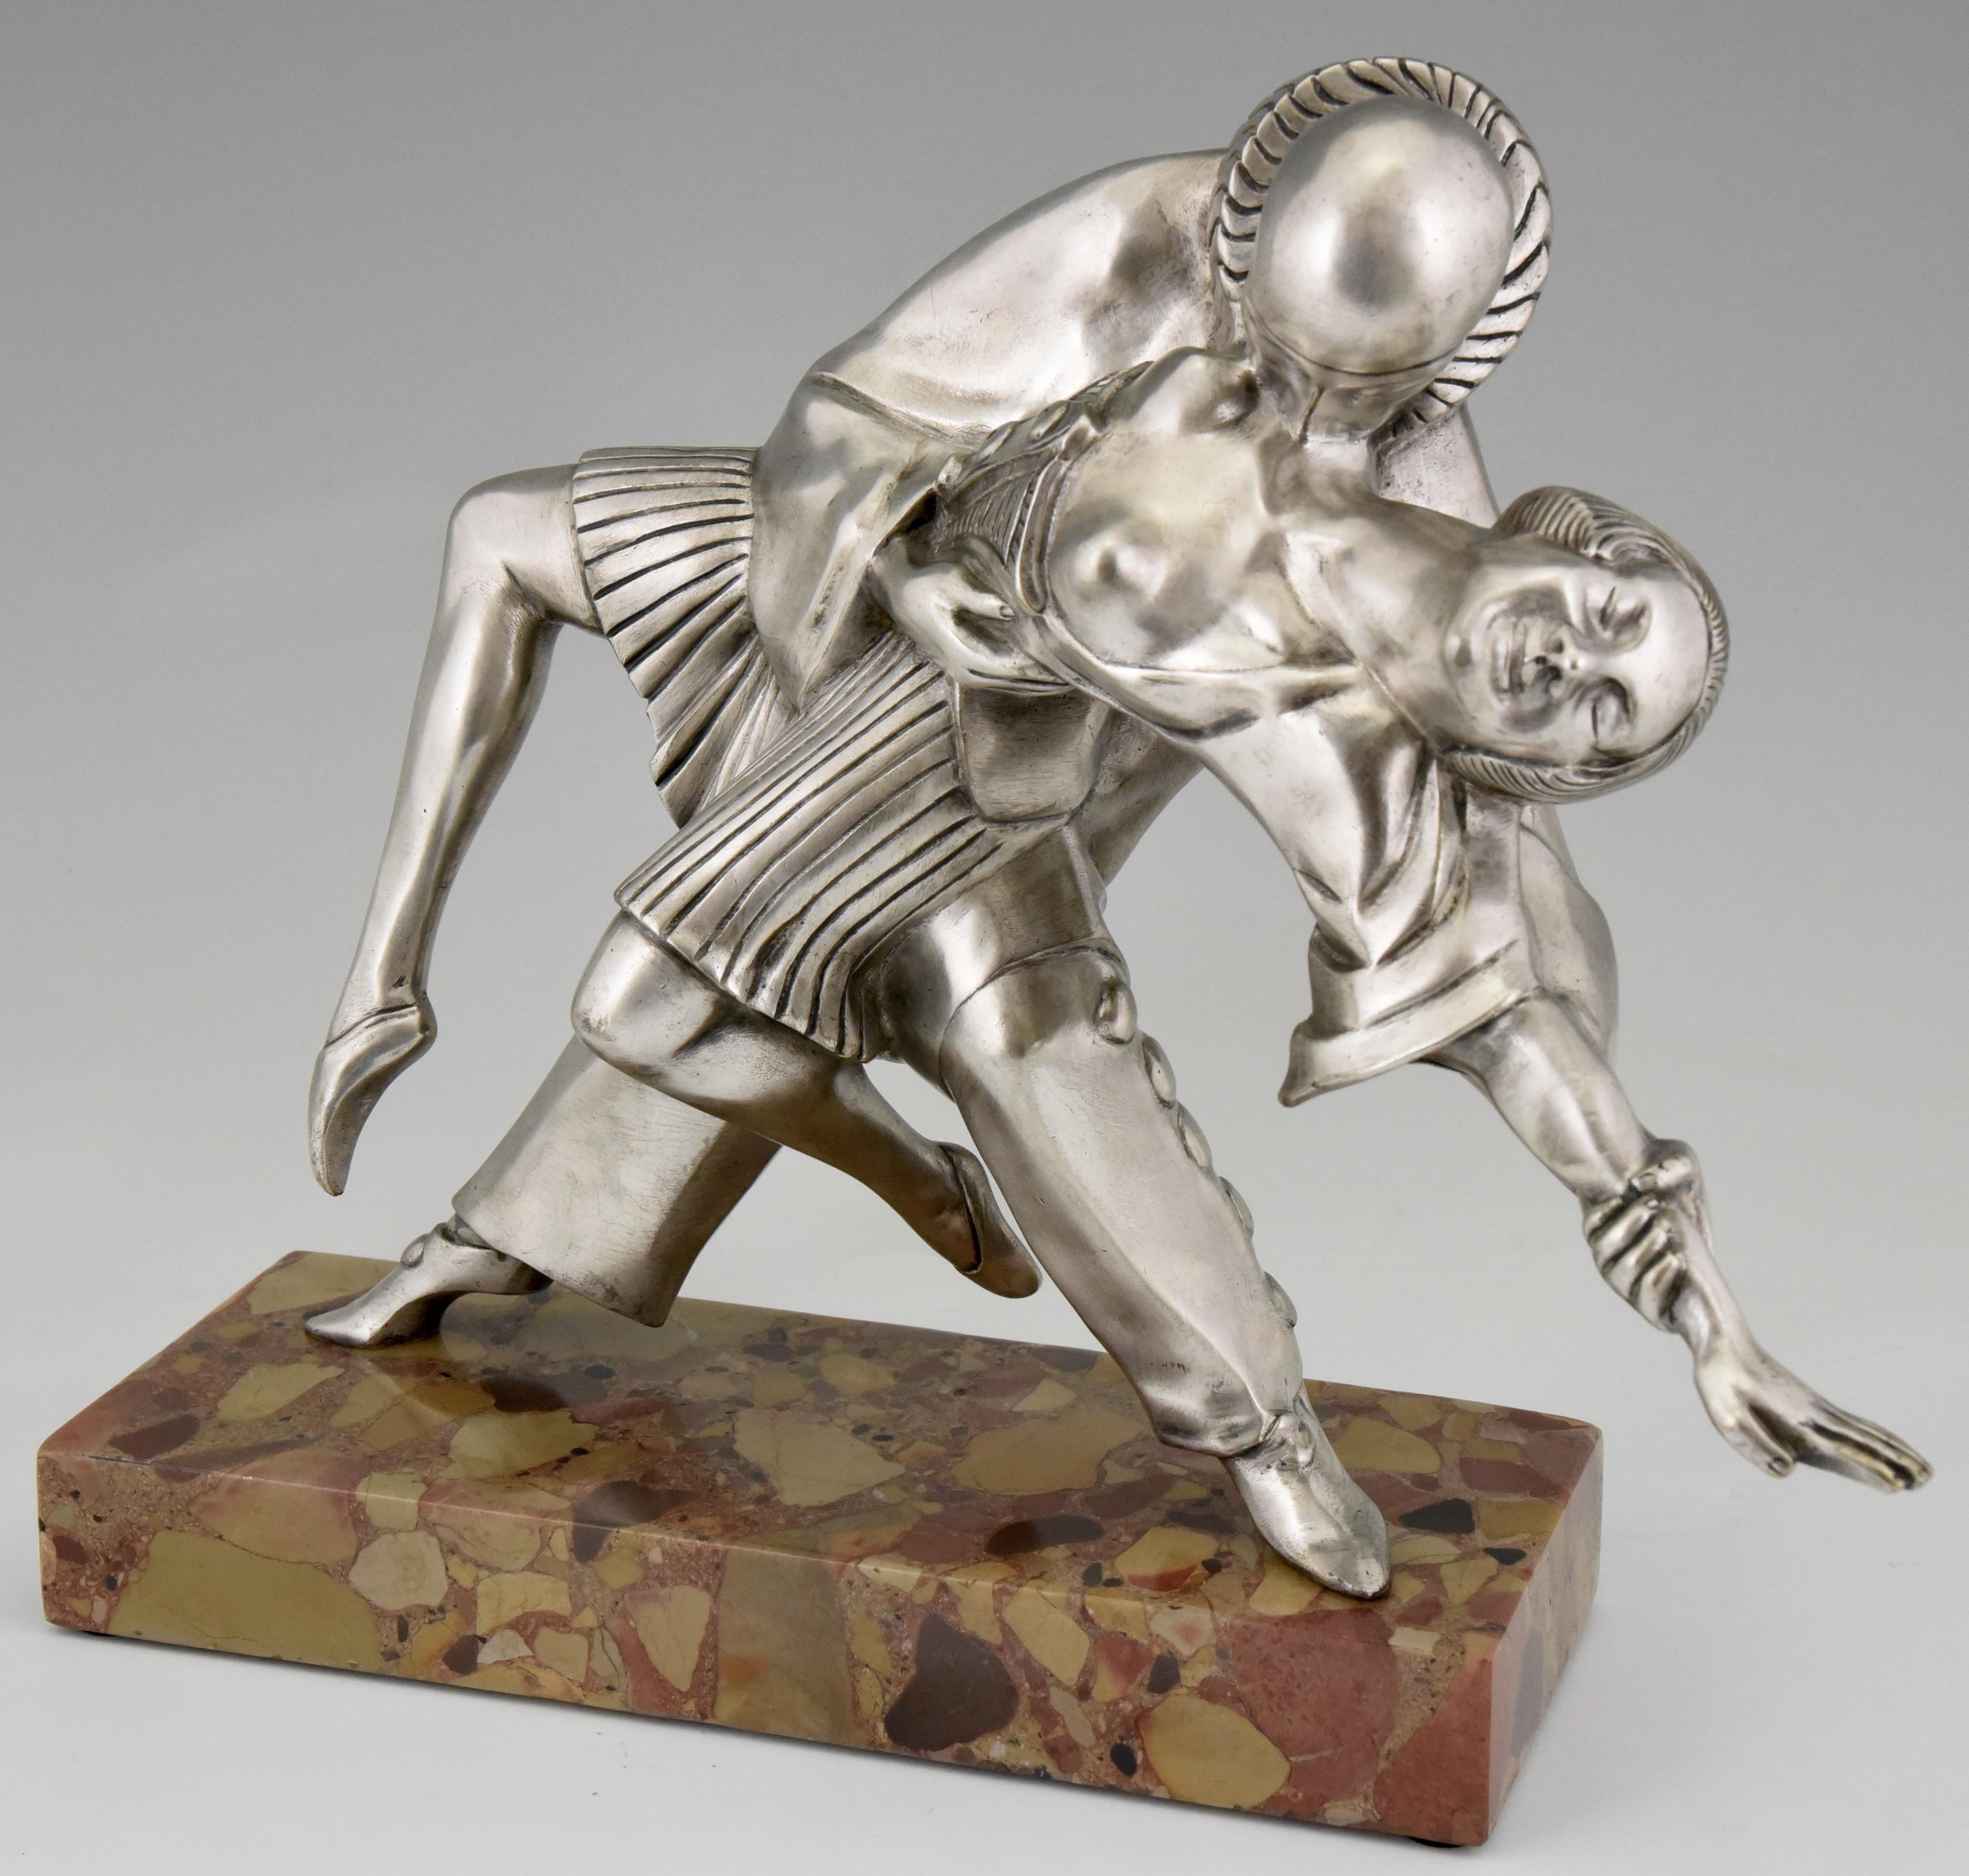 Tango, Art Deco bronze sculpture cubist dancers Pierrot and Colombine by Thomas Cartier, France 1930. 
The bronze has a silver patina and stands on a marble base. 
Literature:
“Bronzes, sculptors and founders” by H. Berman, Abage. ?“Les bronzes